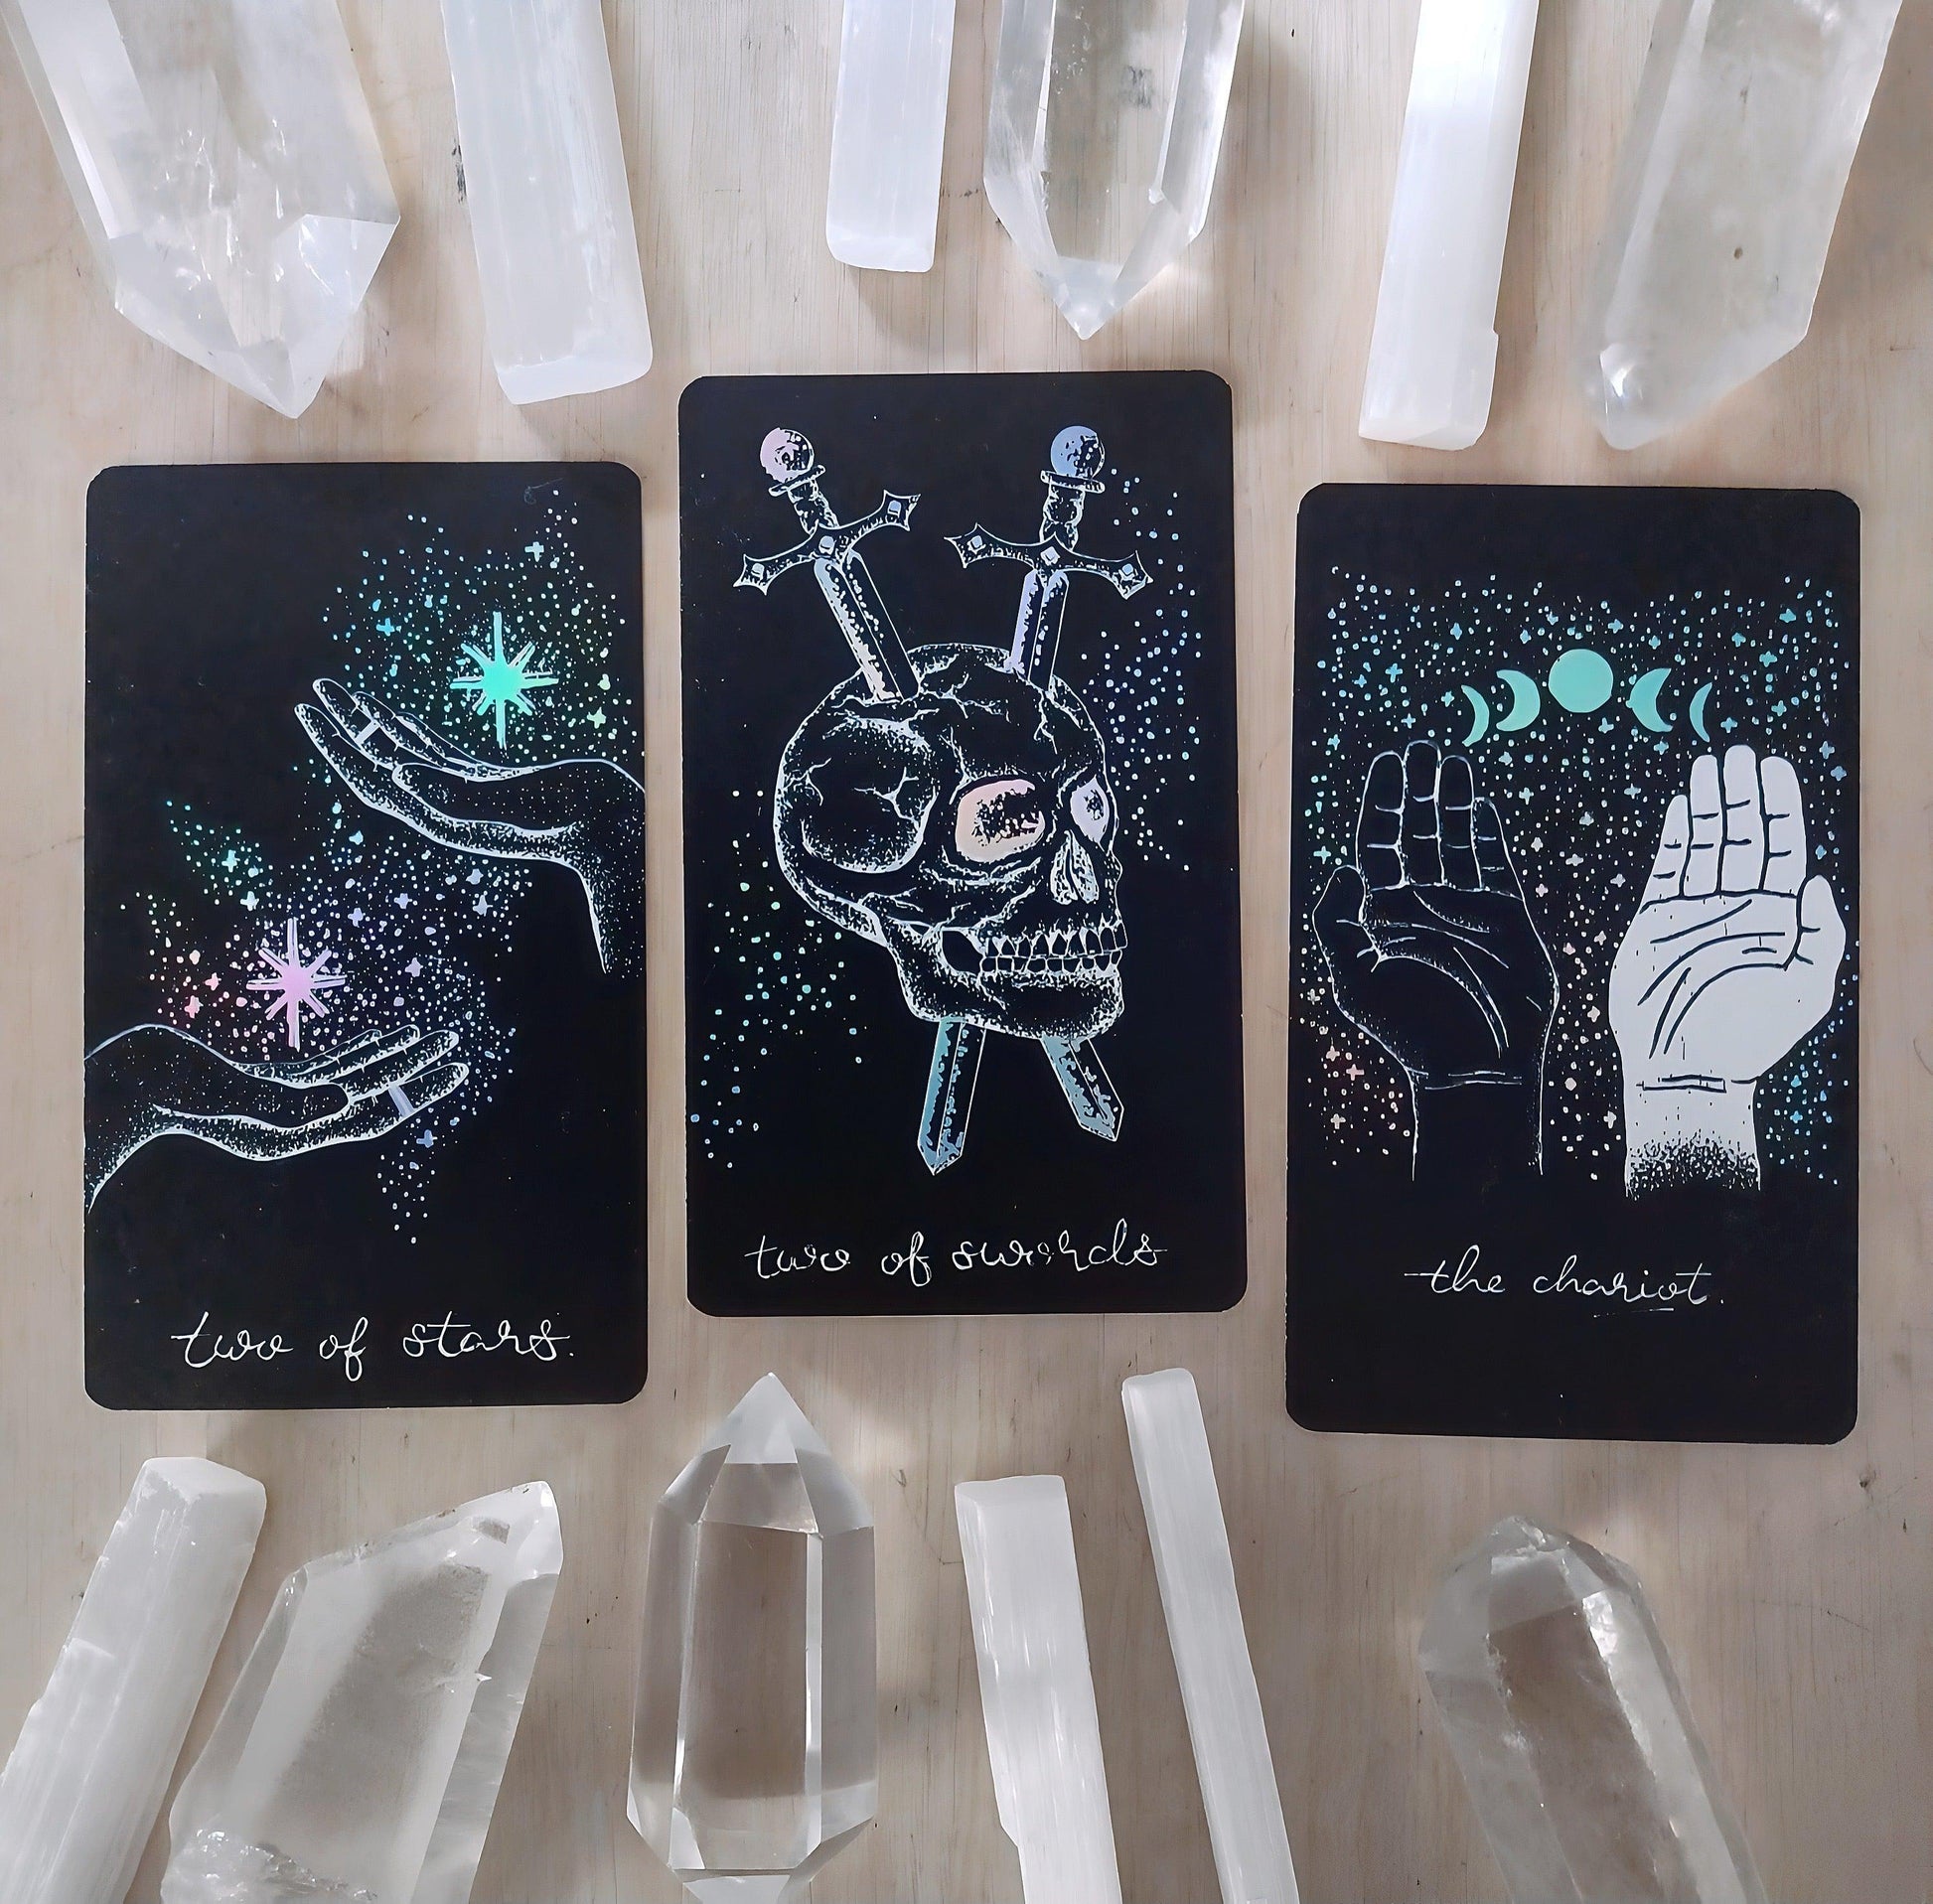 black & holographic tarot cards with crystals, from Midnight Sky indie deck